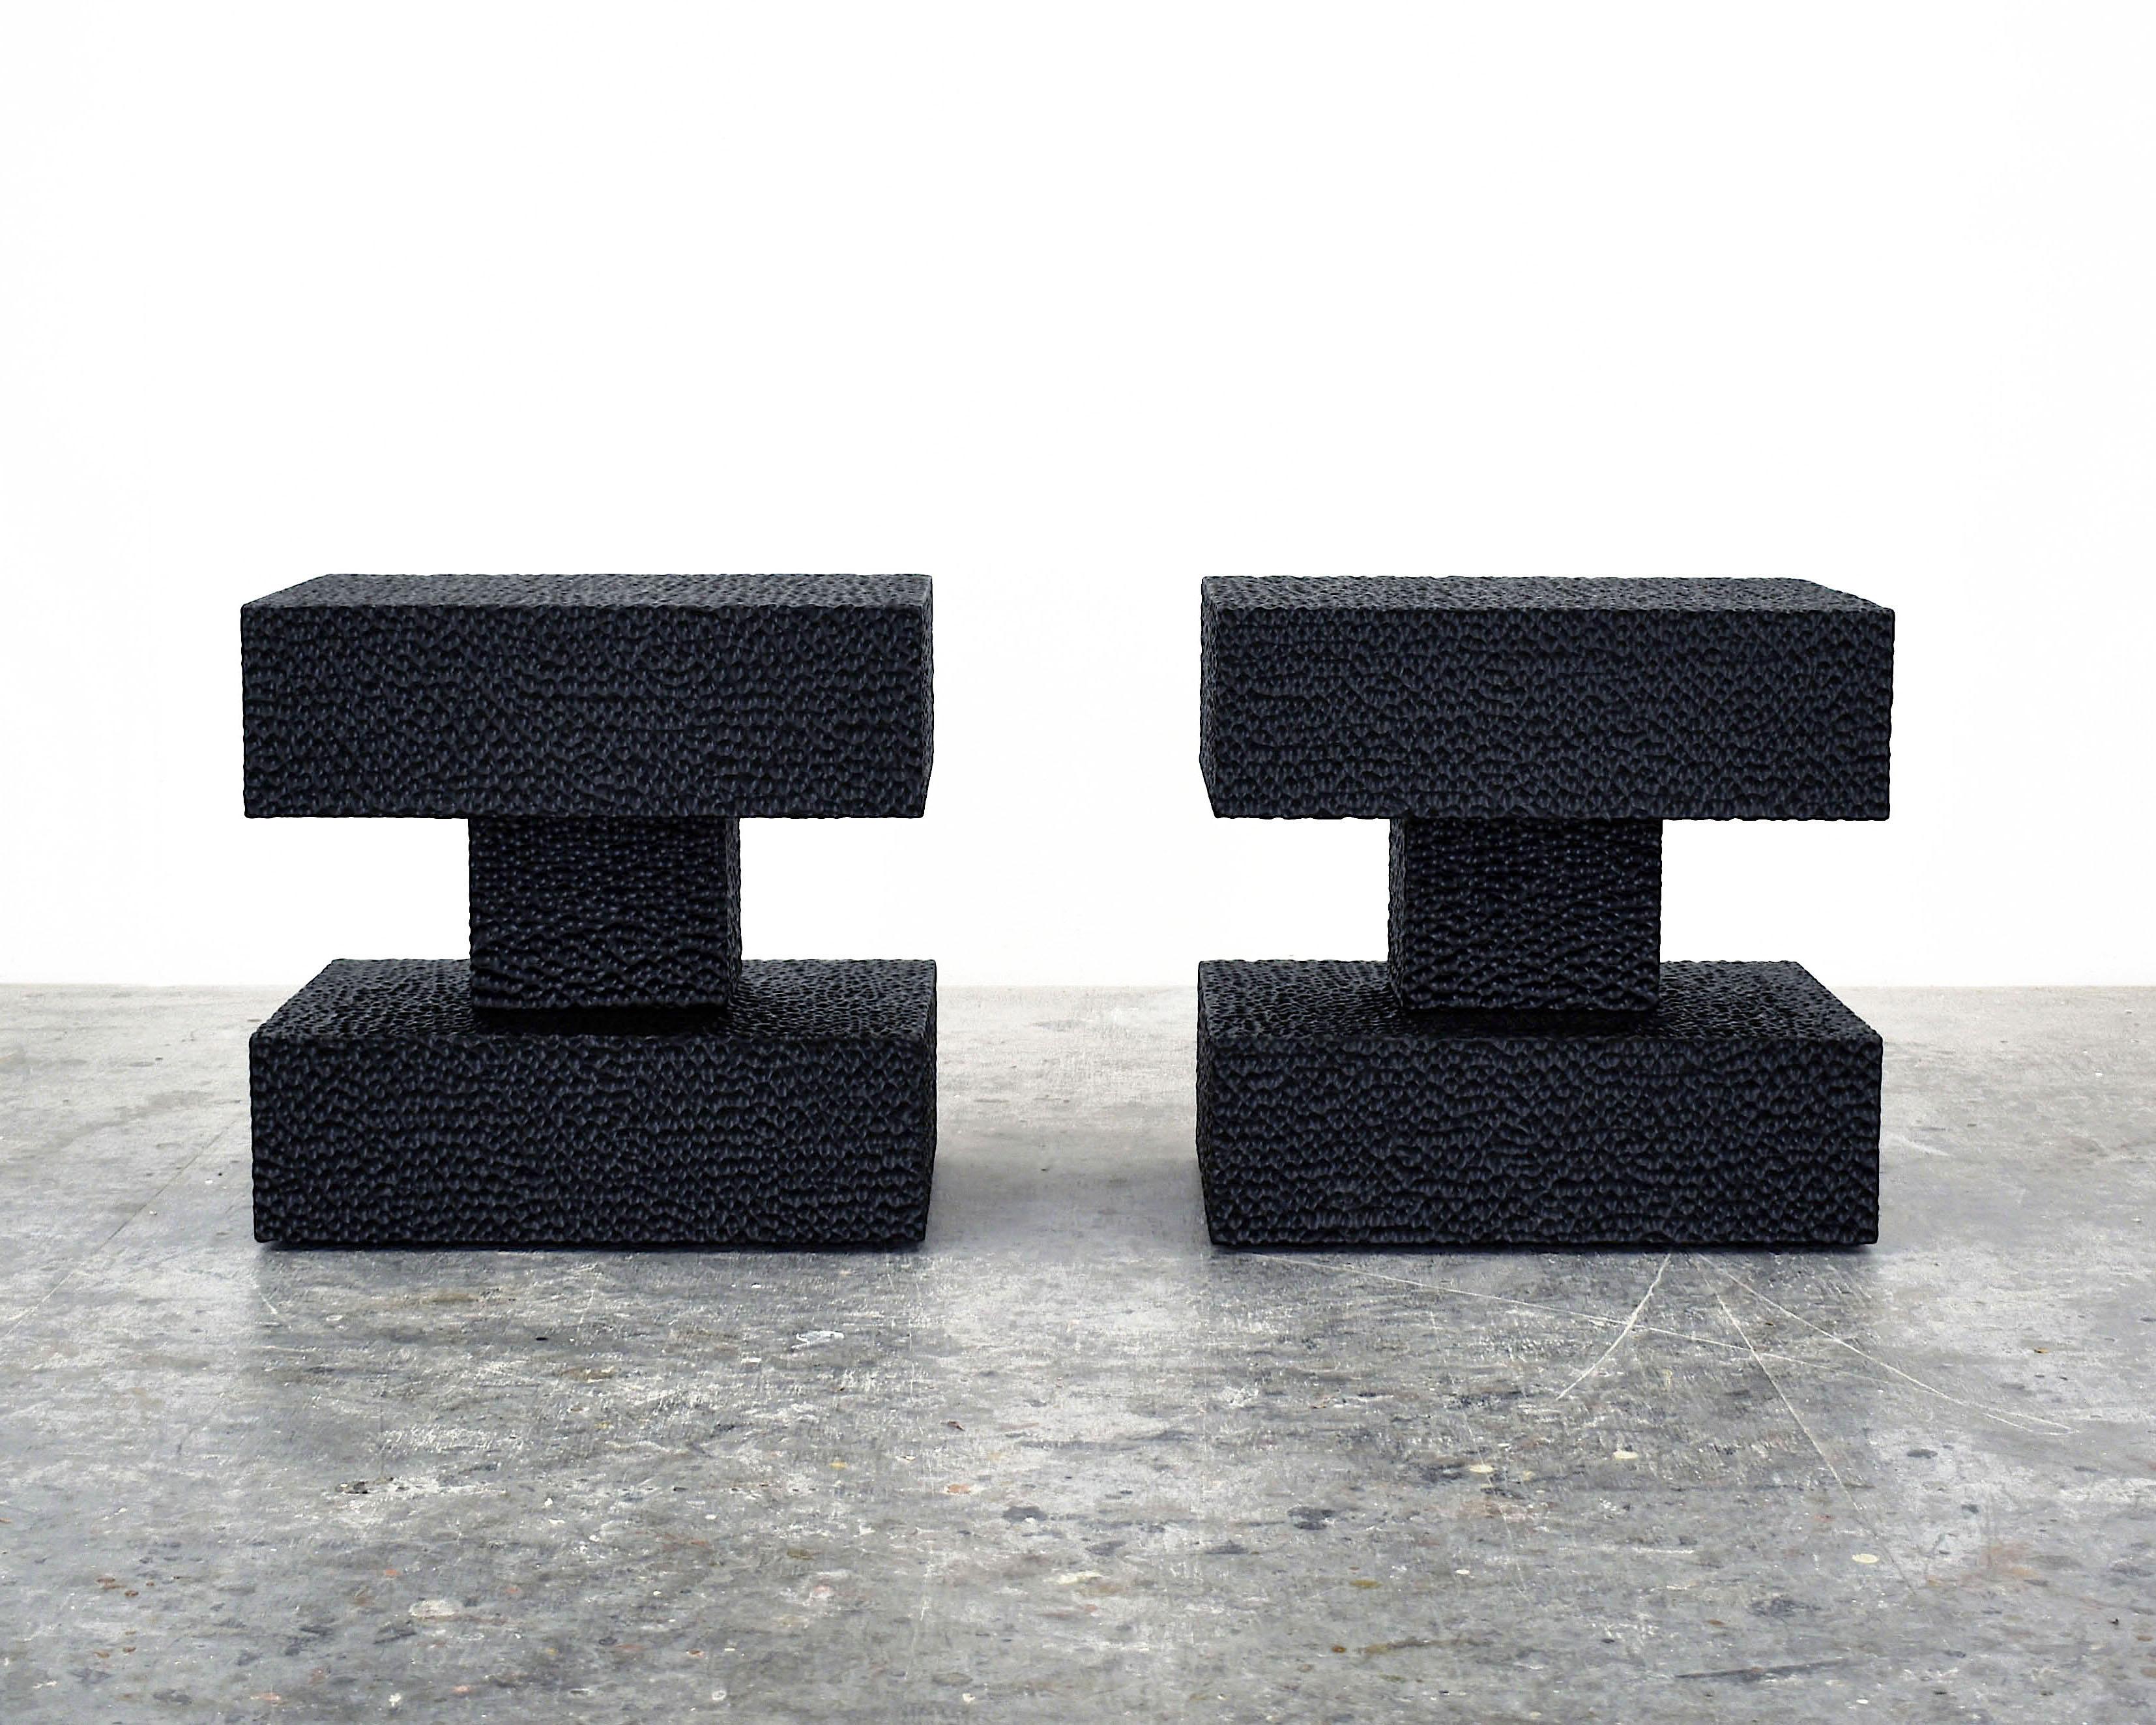 Set of 2 pillar table by John Eric Byers
Dimensions: 50.8 x 50.8 x 35.5 cm
Materials: Carved blackened maple

All works are individually handmade to order.

John Eric Byers creates geometrically inspired pieces that are minimal, emotional, and